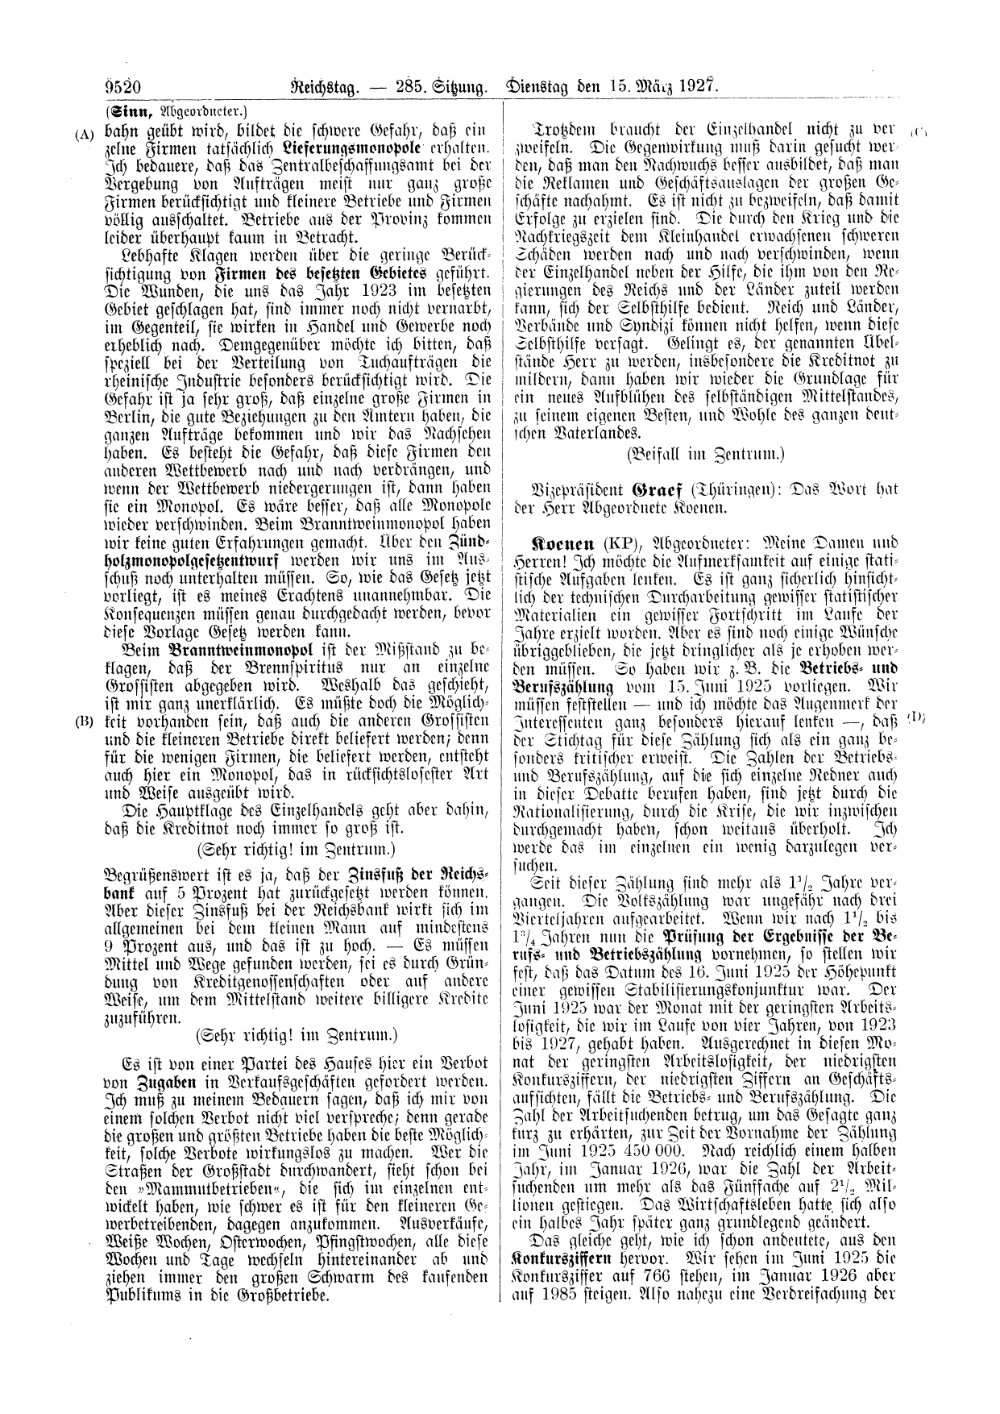 Scan of page 9520